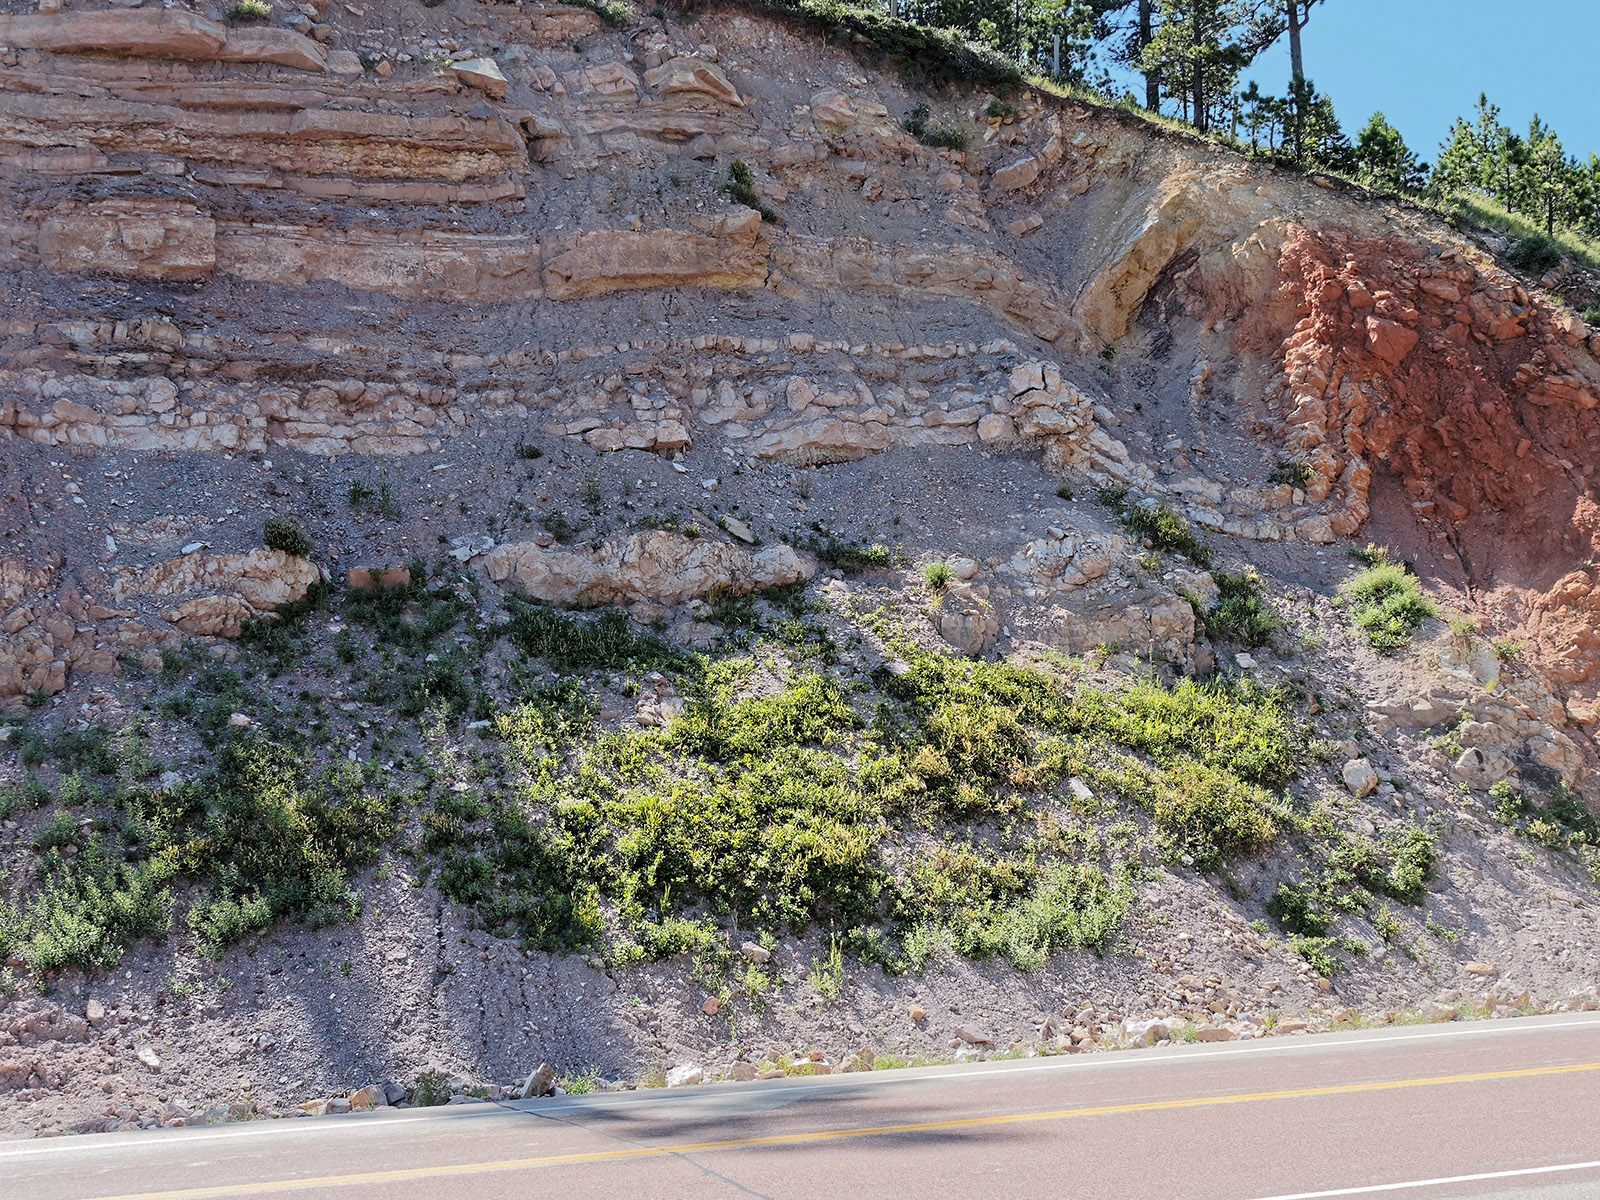 The dip in the strata in the right side of the field is a syncline along a small fault cutting the Amsden formation.